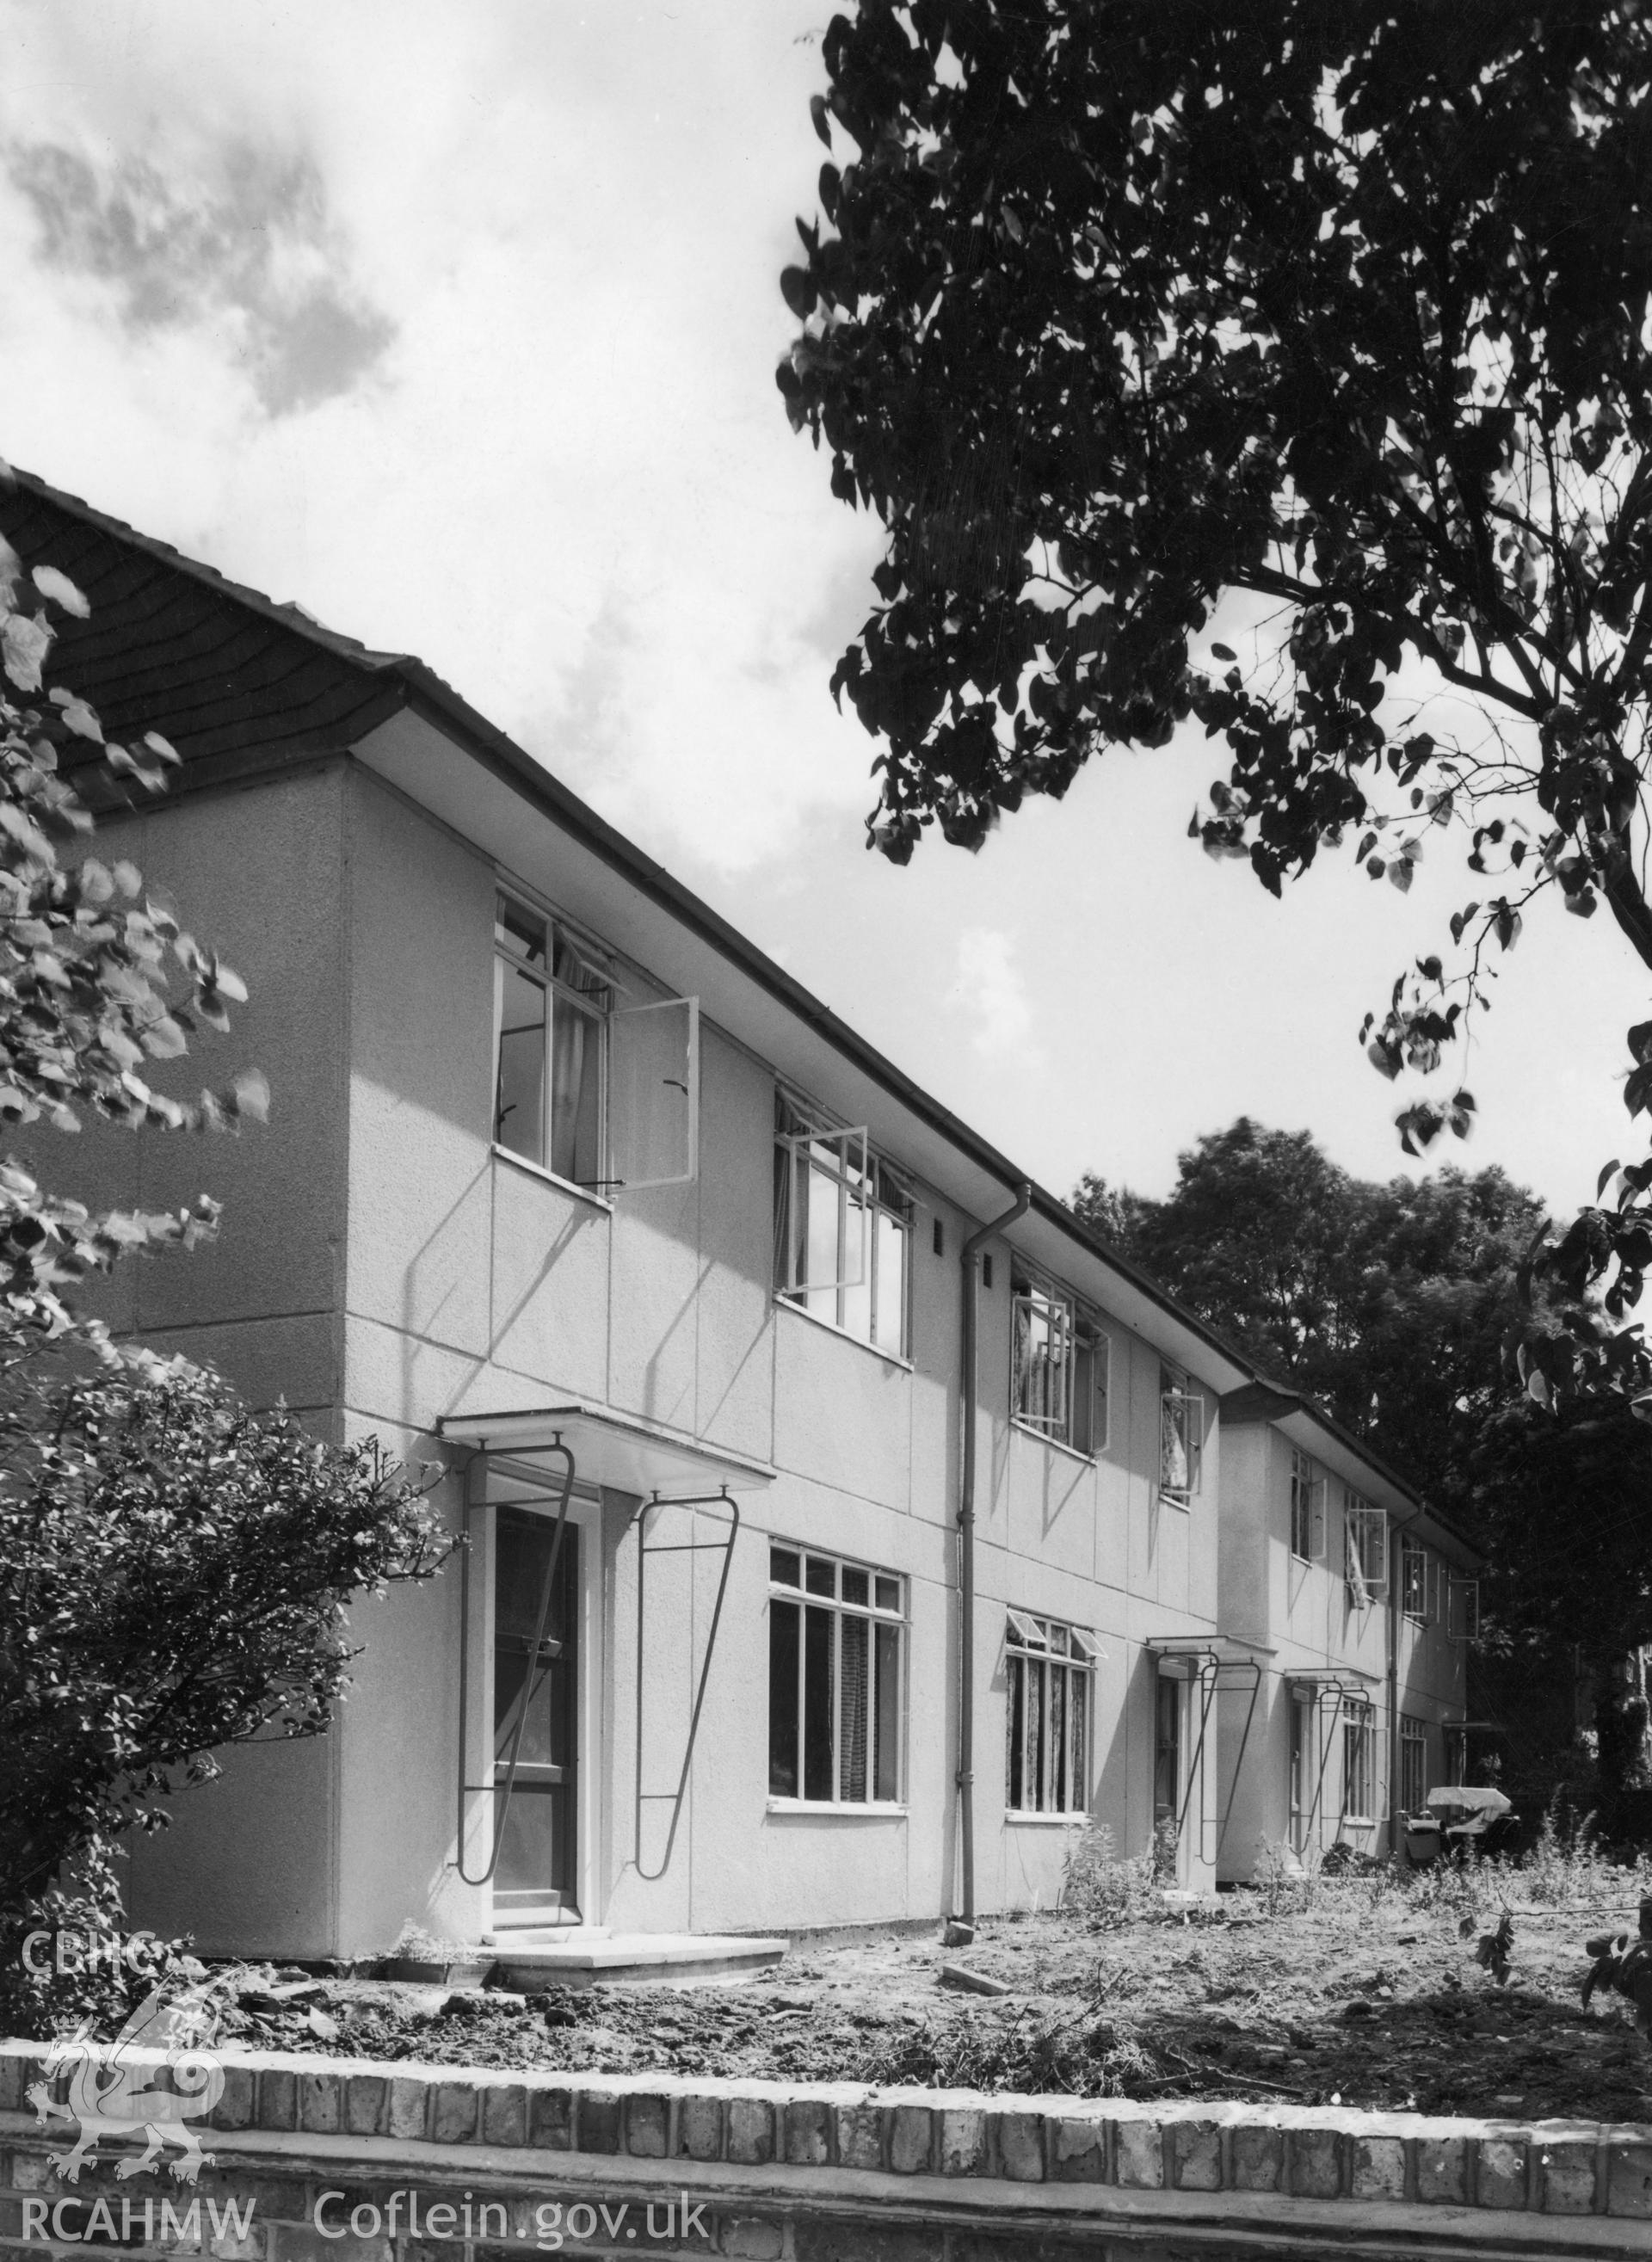 1 b/w print showing 2-storey prefabricated Wates houses in Wales, dated c. 1951; collated by the former Central Office of Information.